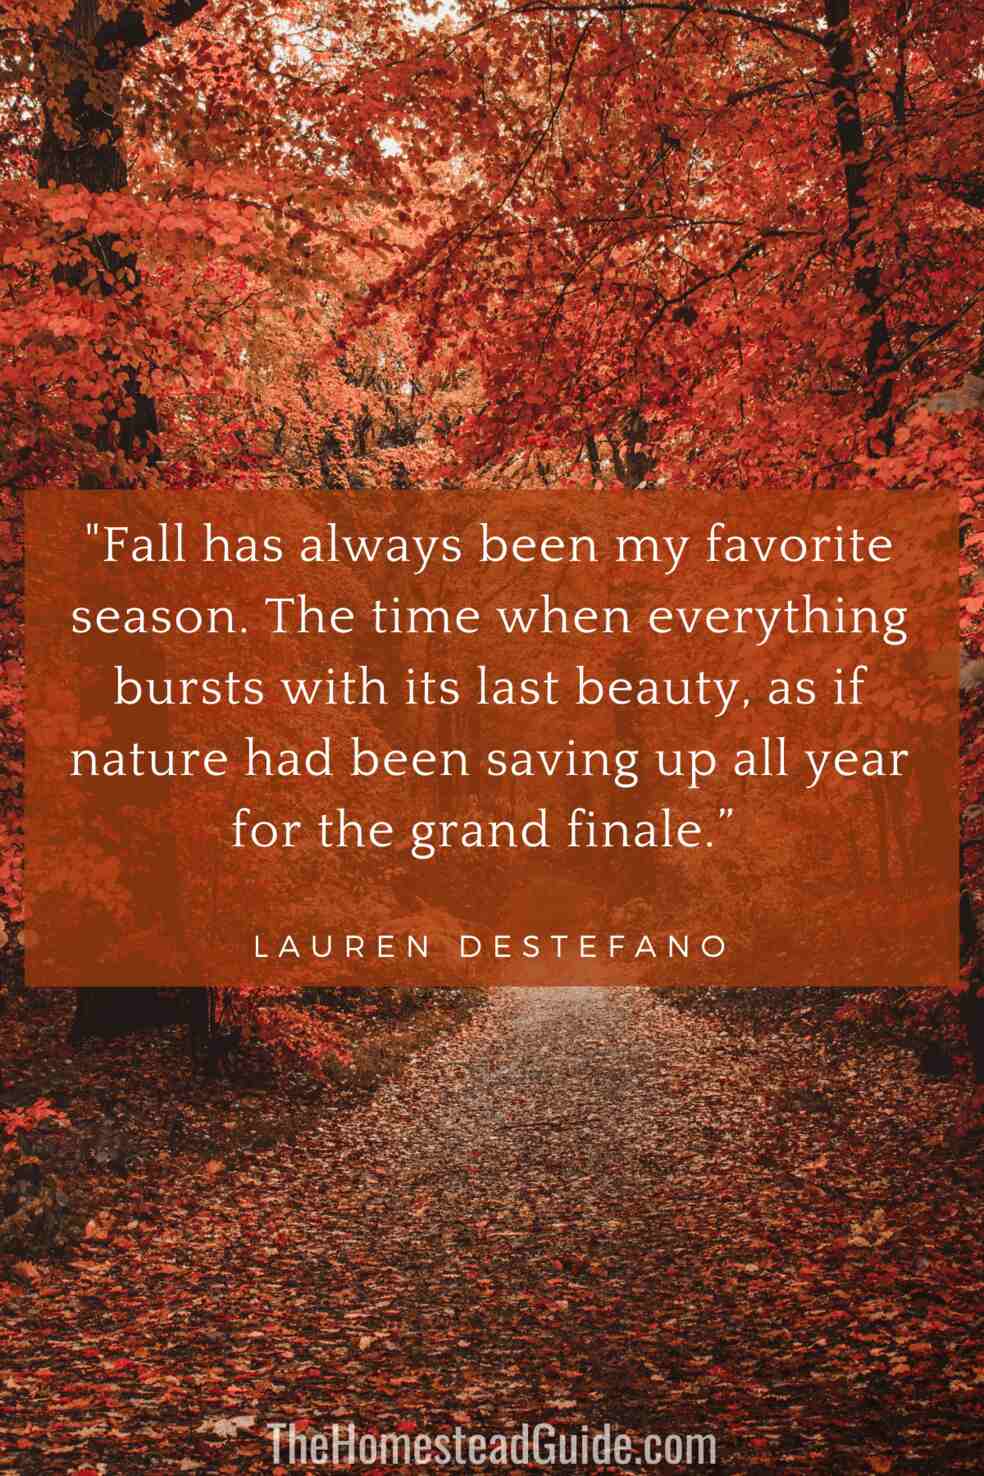 Fall has always been my favorite season. The time when everything bursts with its last beauty, as if nature had been saving up all year for the grand finale.